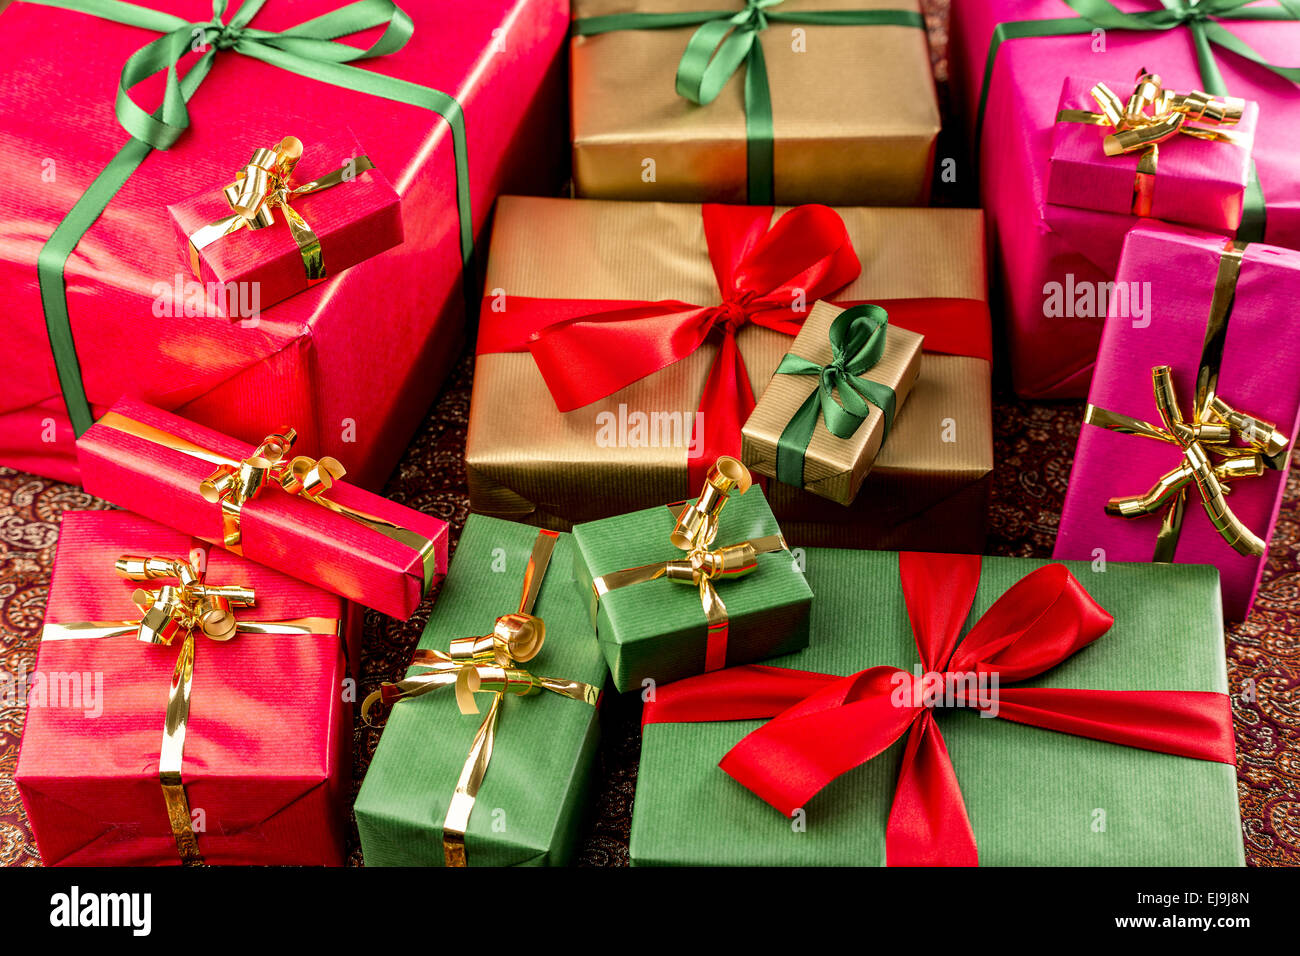 Wrapped Gifts Assorted by Color Stock Photo